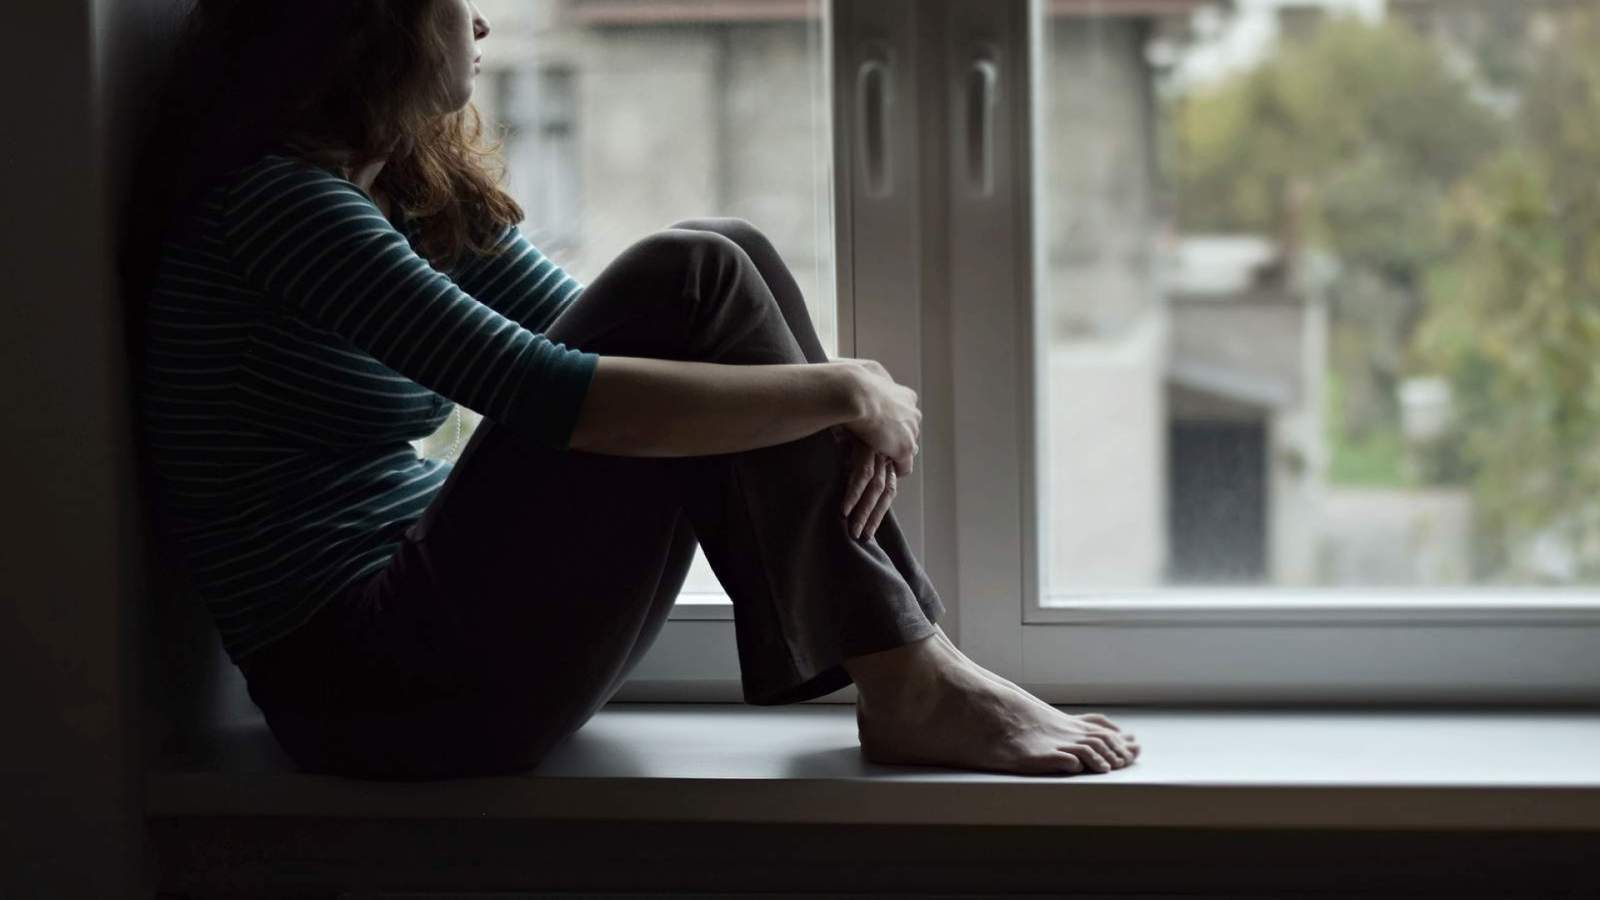 Michigan gets surge of calls from domestic violence victims